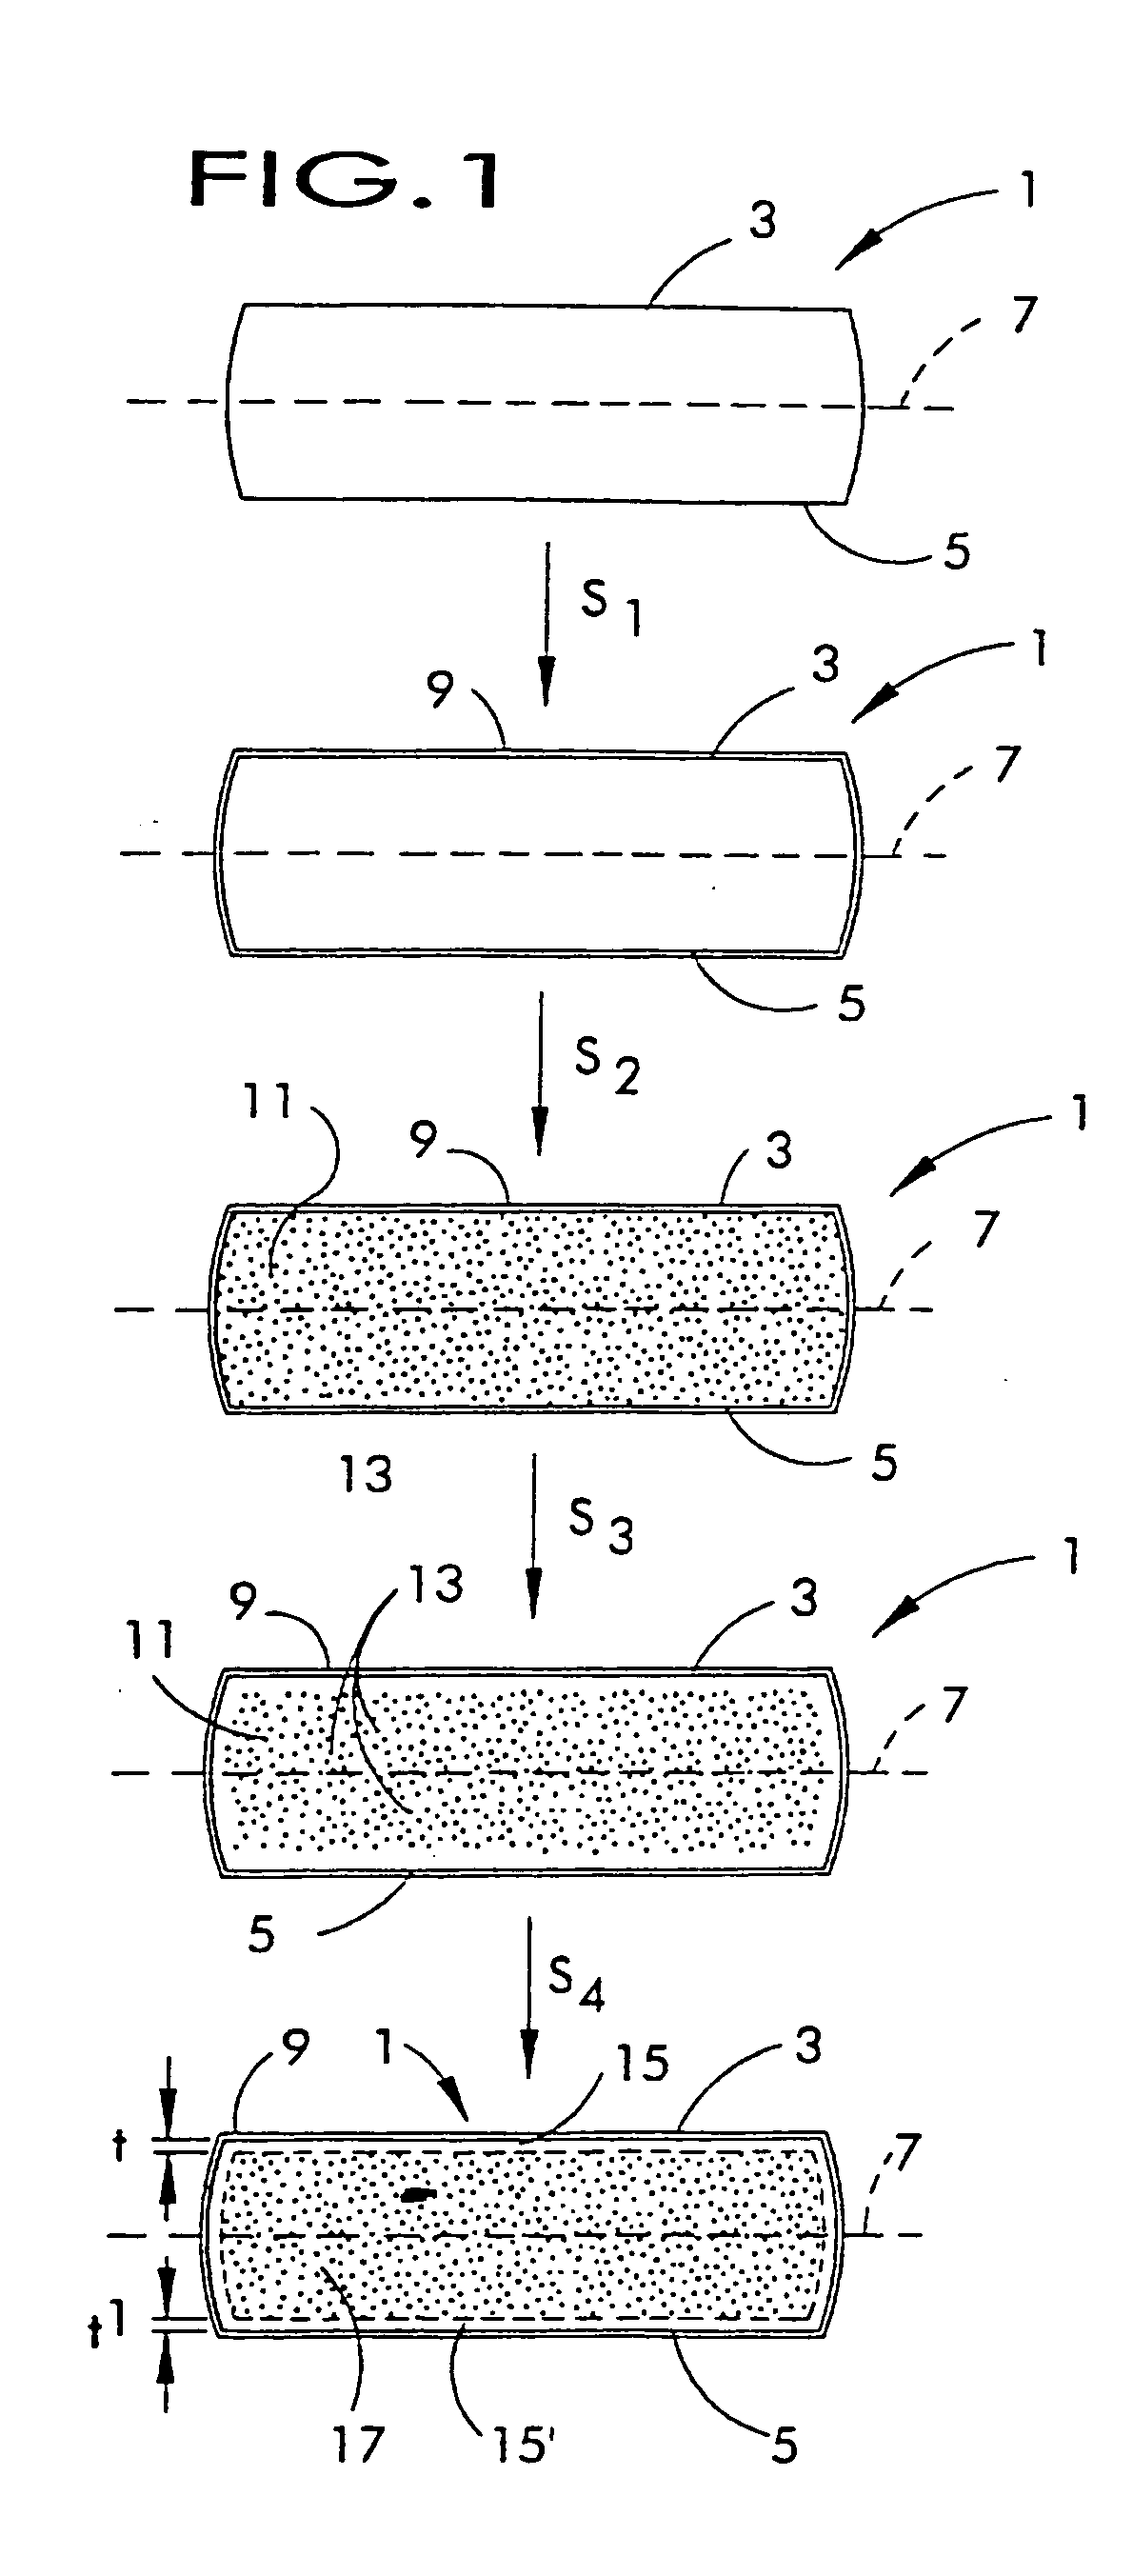 Process for making silicon wafers with stabilized oxygen precipitate nucleation centers